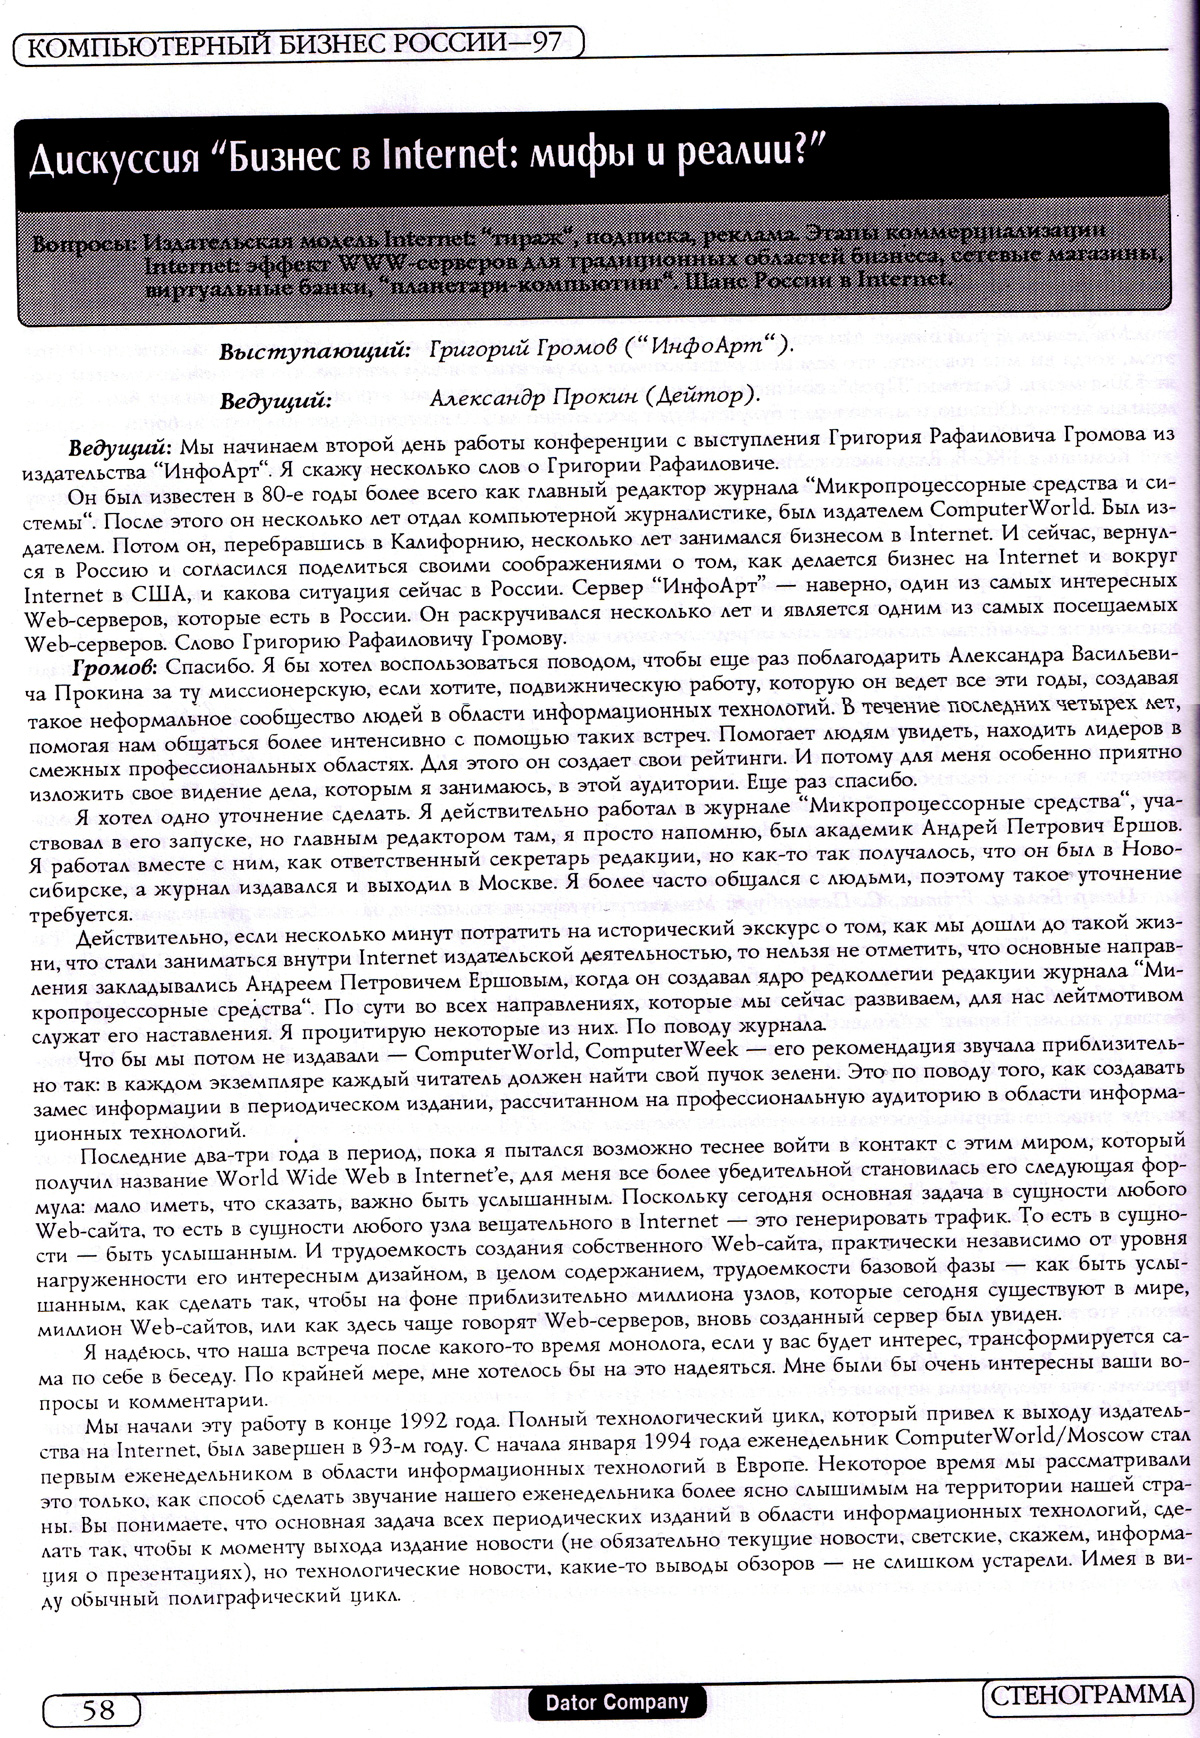 The Myths about Internet Business, By Gregory Gromov, Proceedings of the III National Conference of Computer Business in Russia, 1997, Moscow 